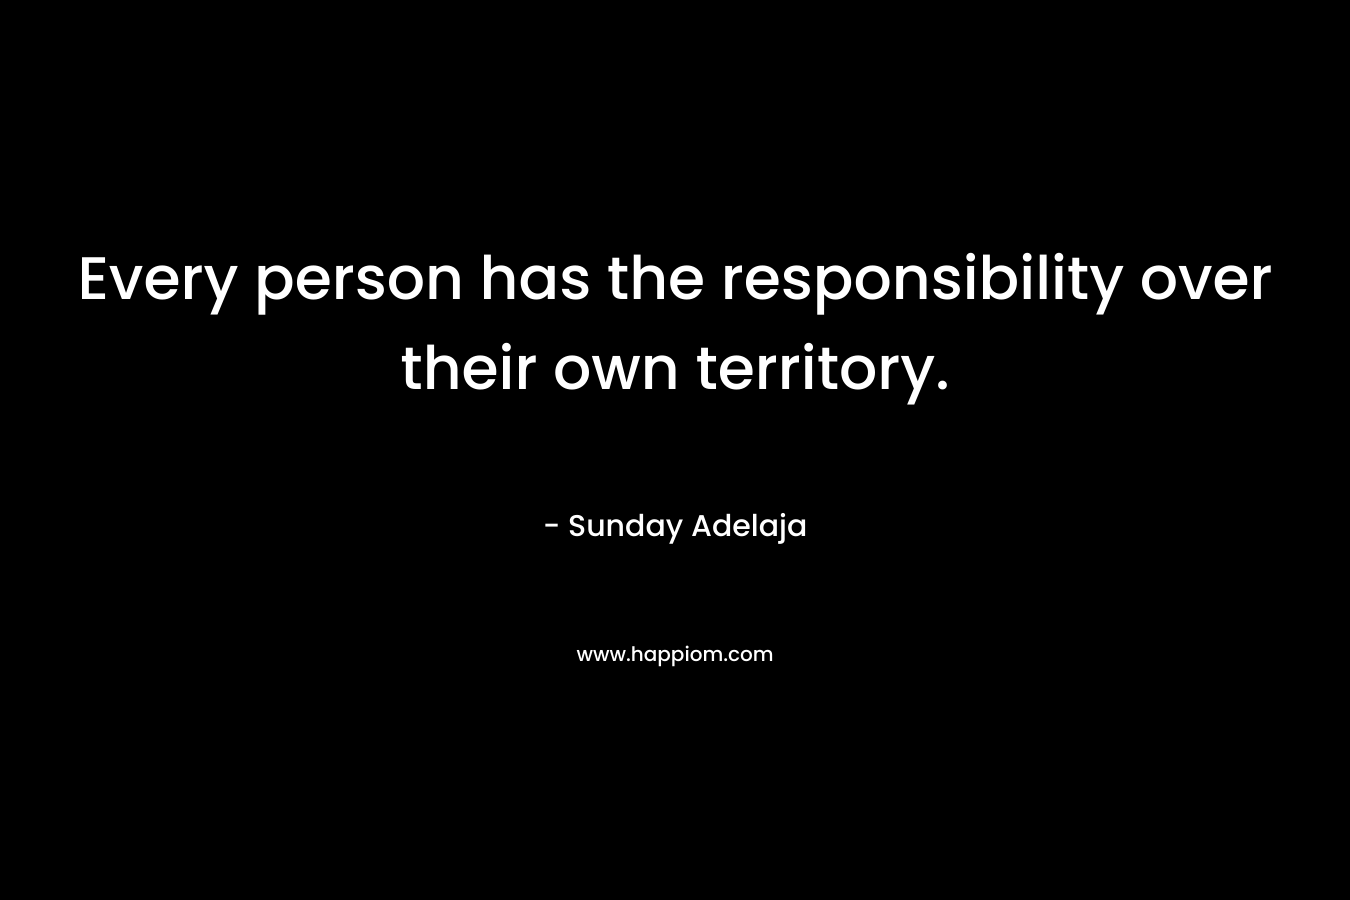 Every person has the responsibility over their own territory.